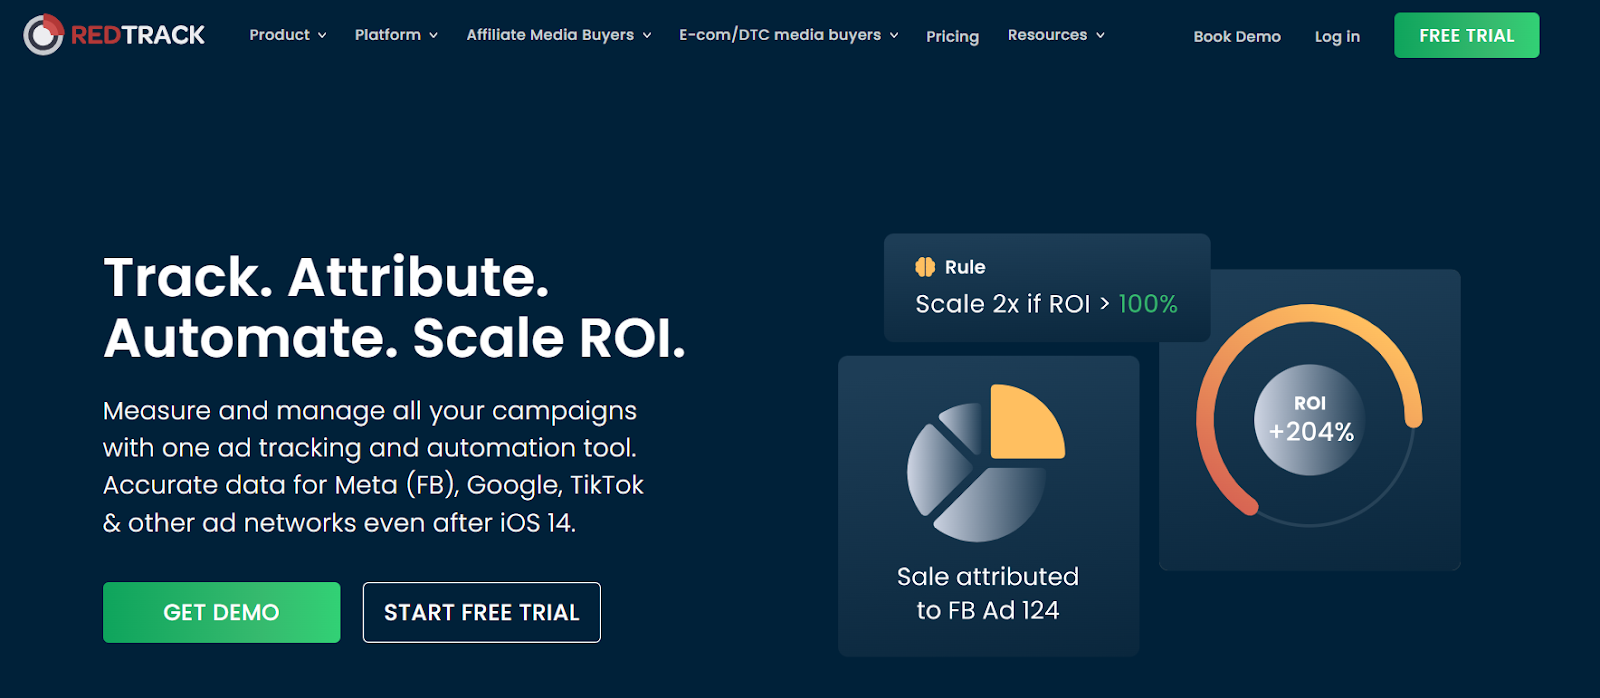 RedTrack Affiliate Tracking Tool